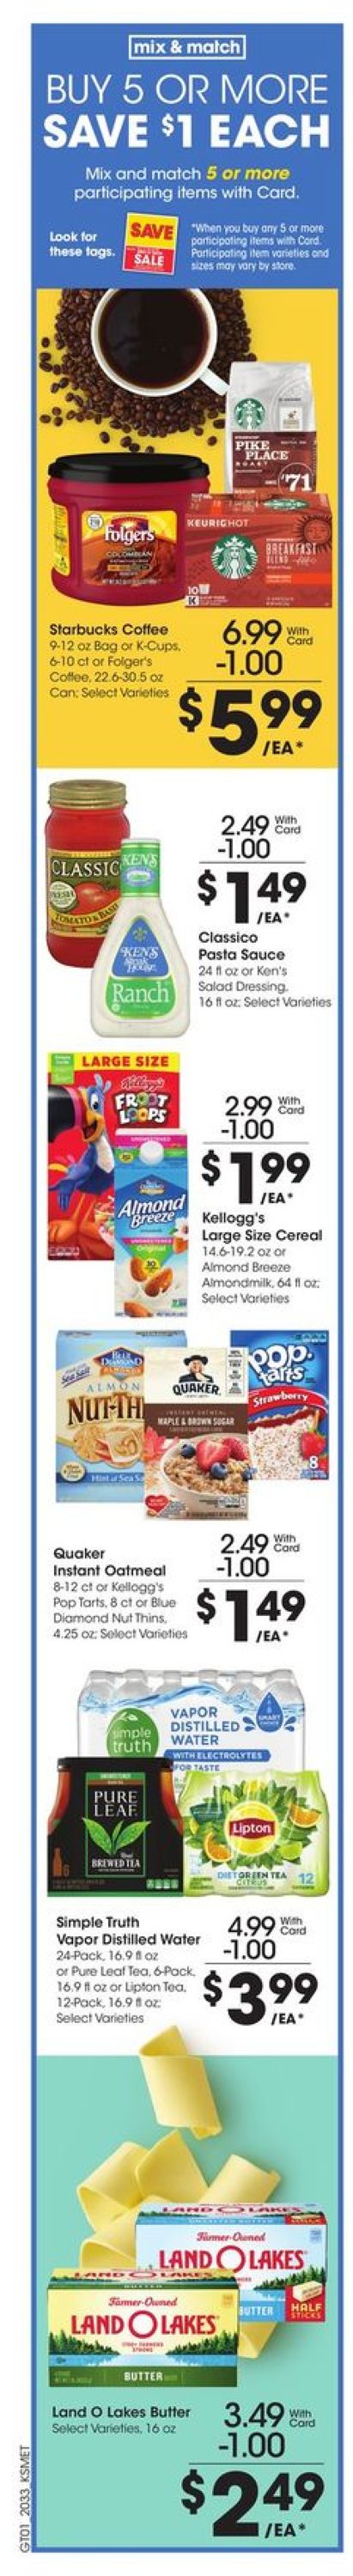 King Soopers Ad from 09/16/2020